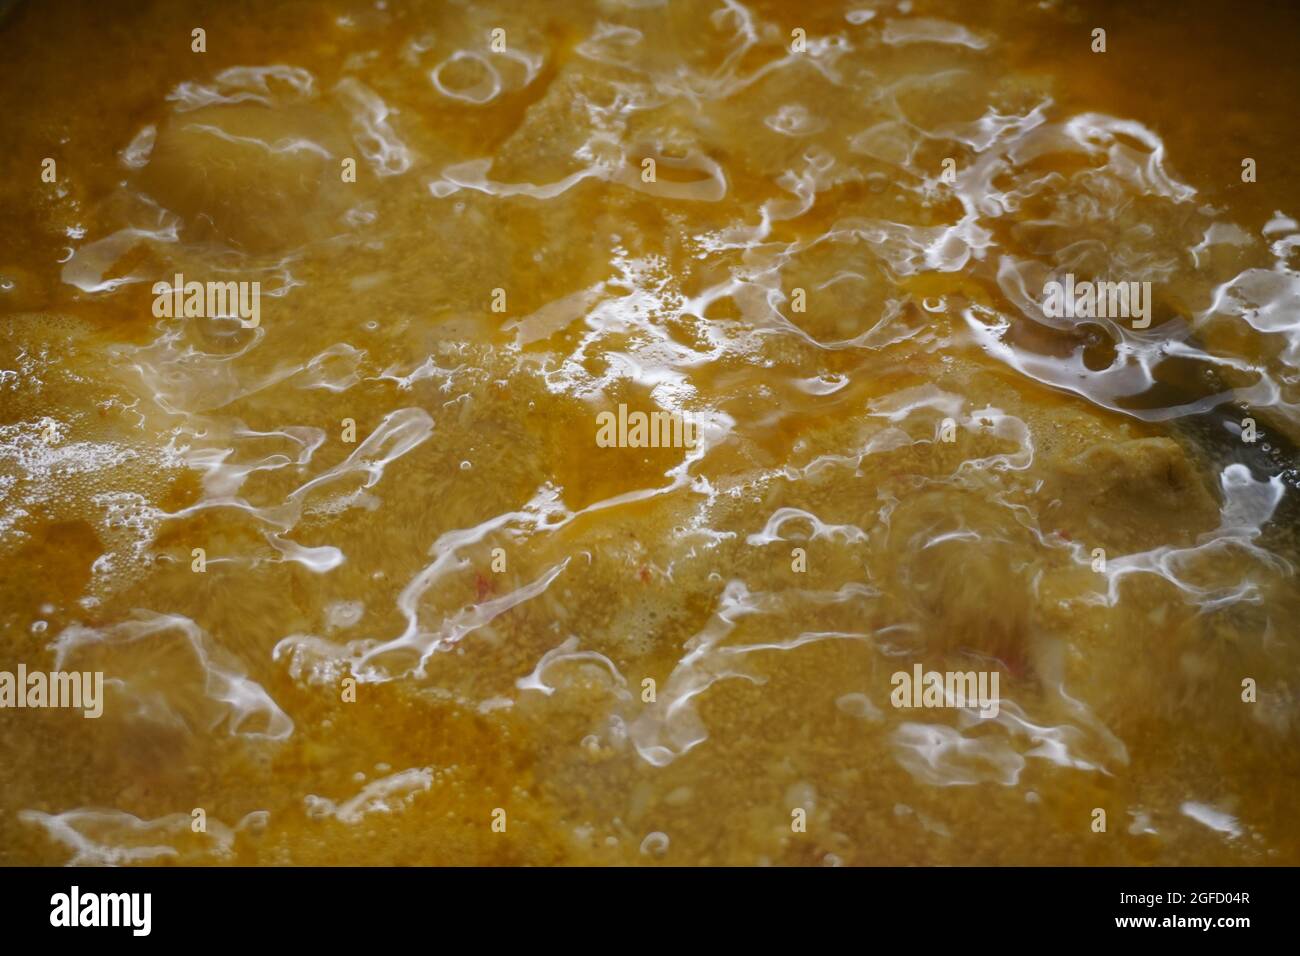 Closeup of unknown simmering stock Stock Photo